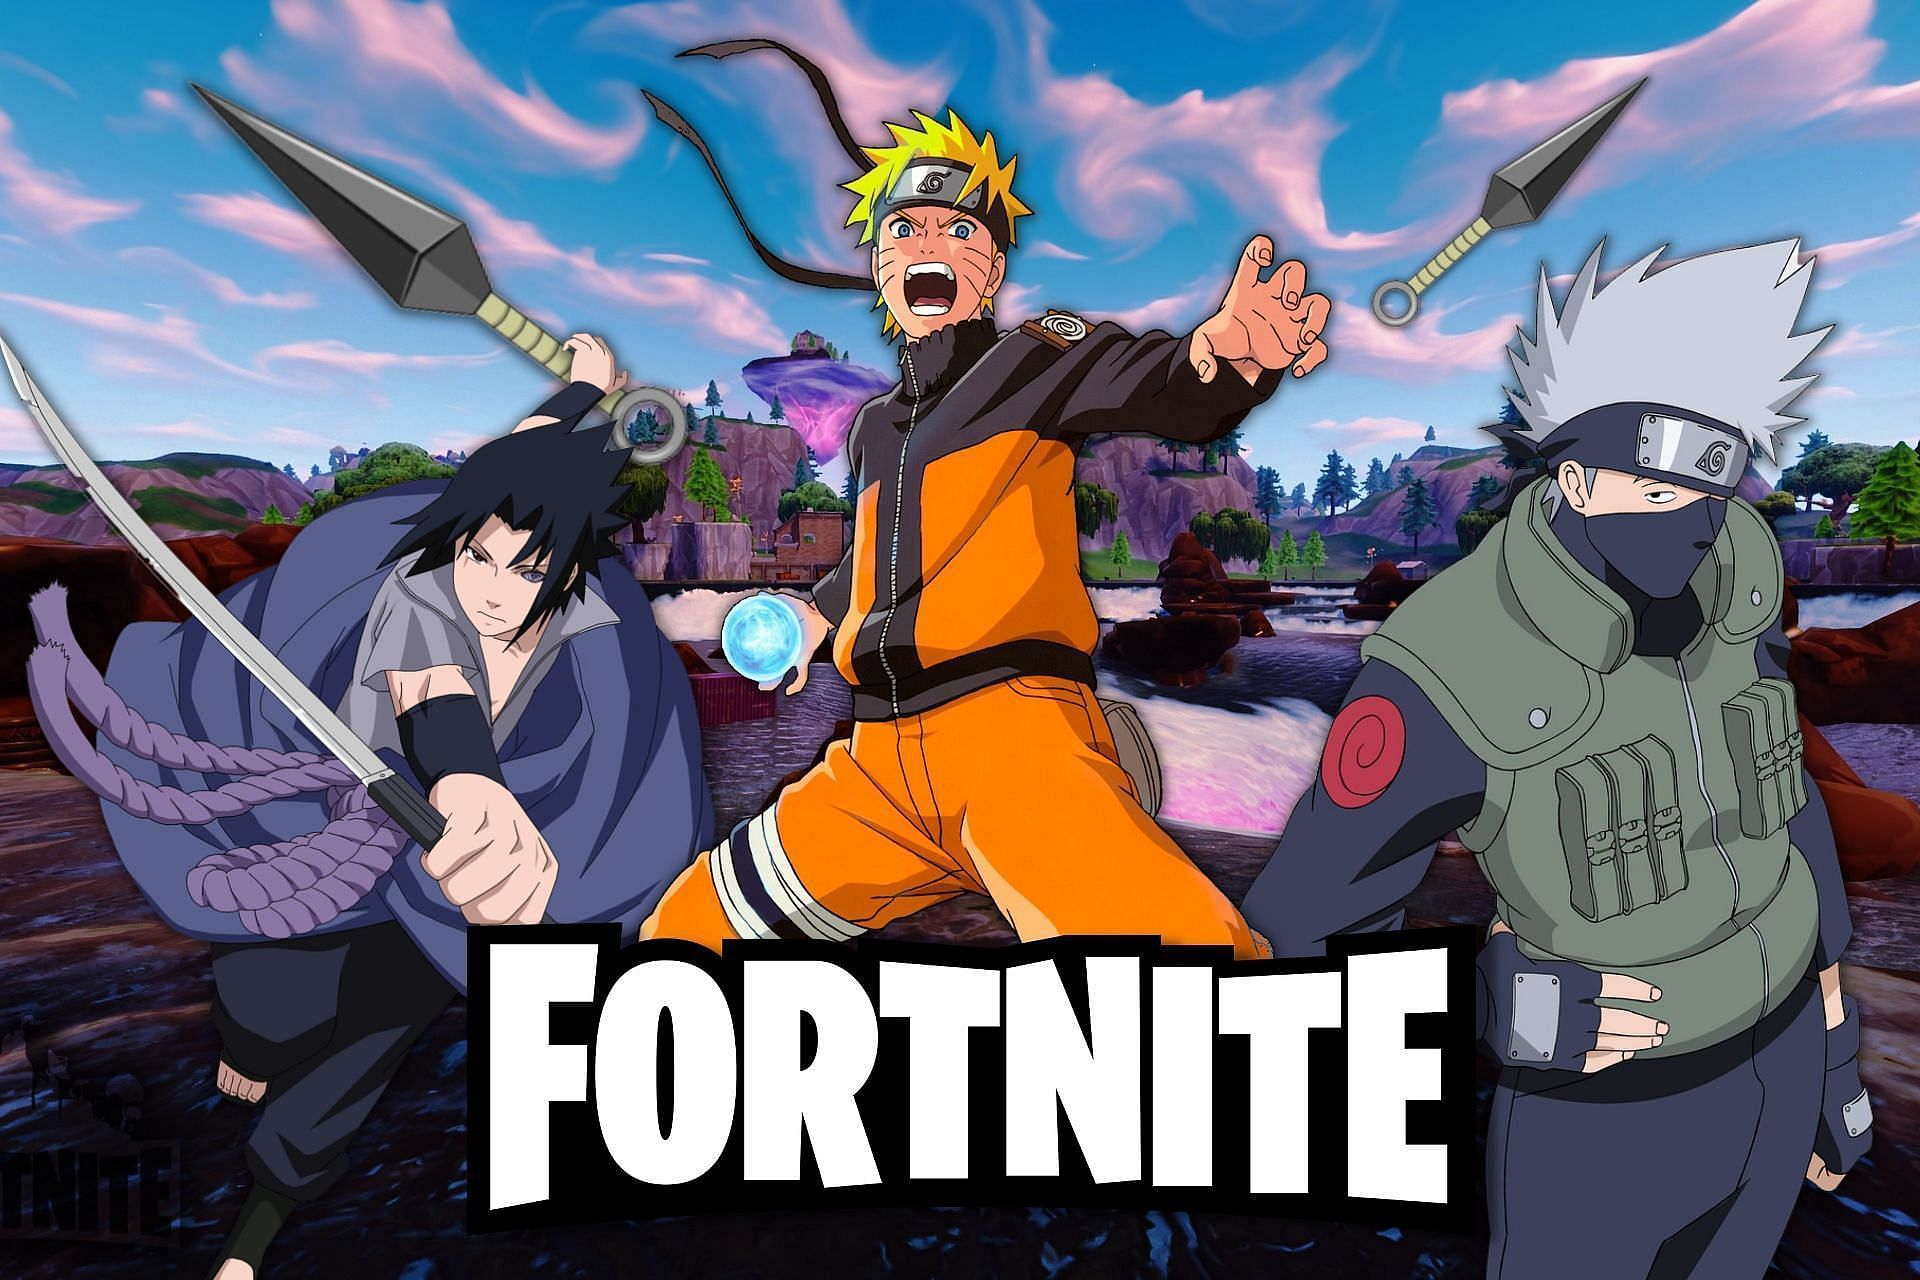 Fortnite players might have to wait till Chapter 3 before more Naruto related skins are released (Image via Sportskeeda)